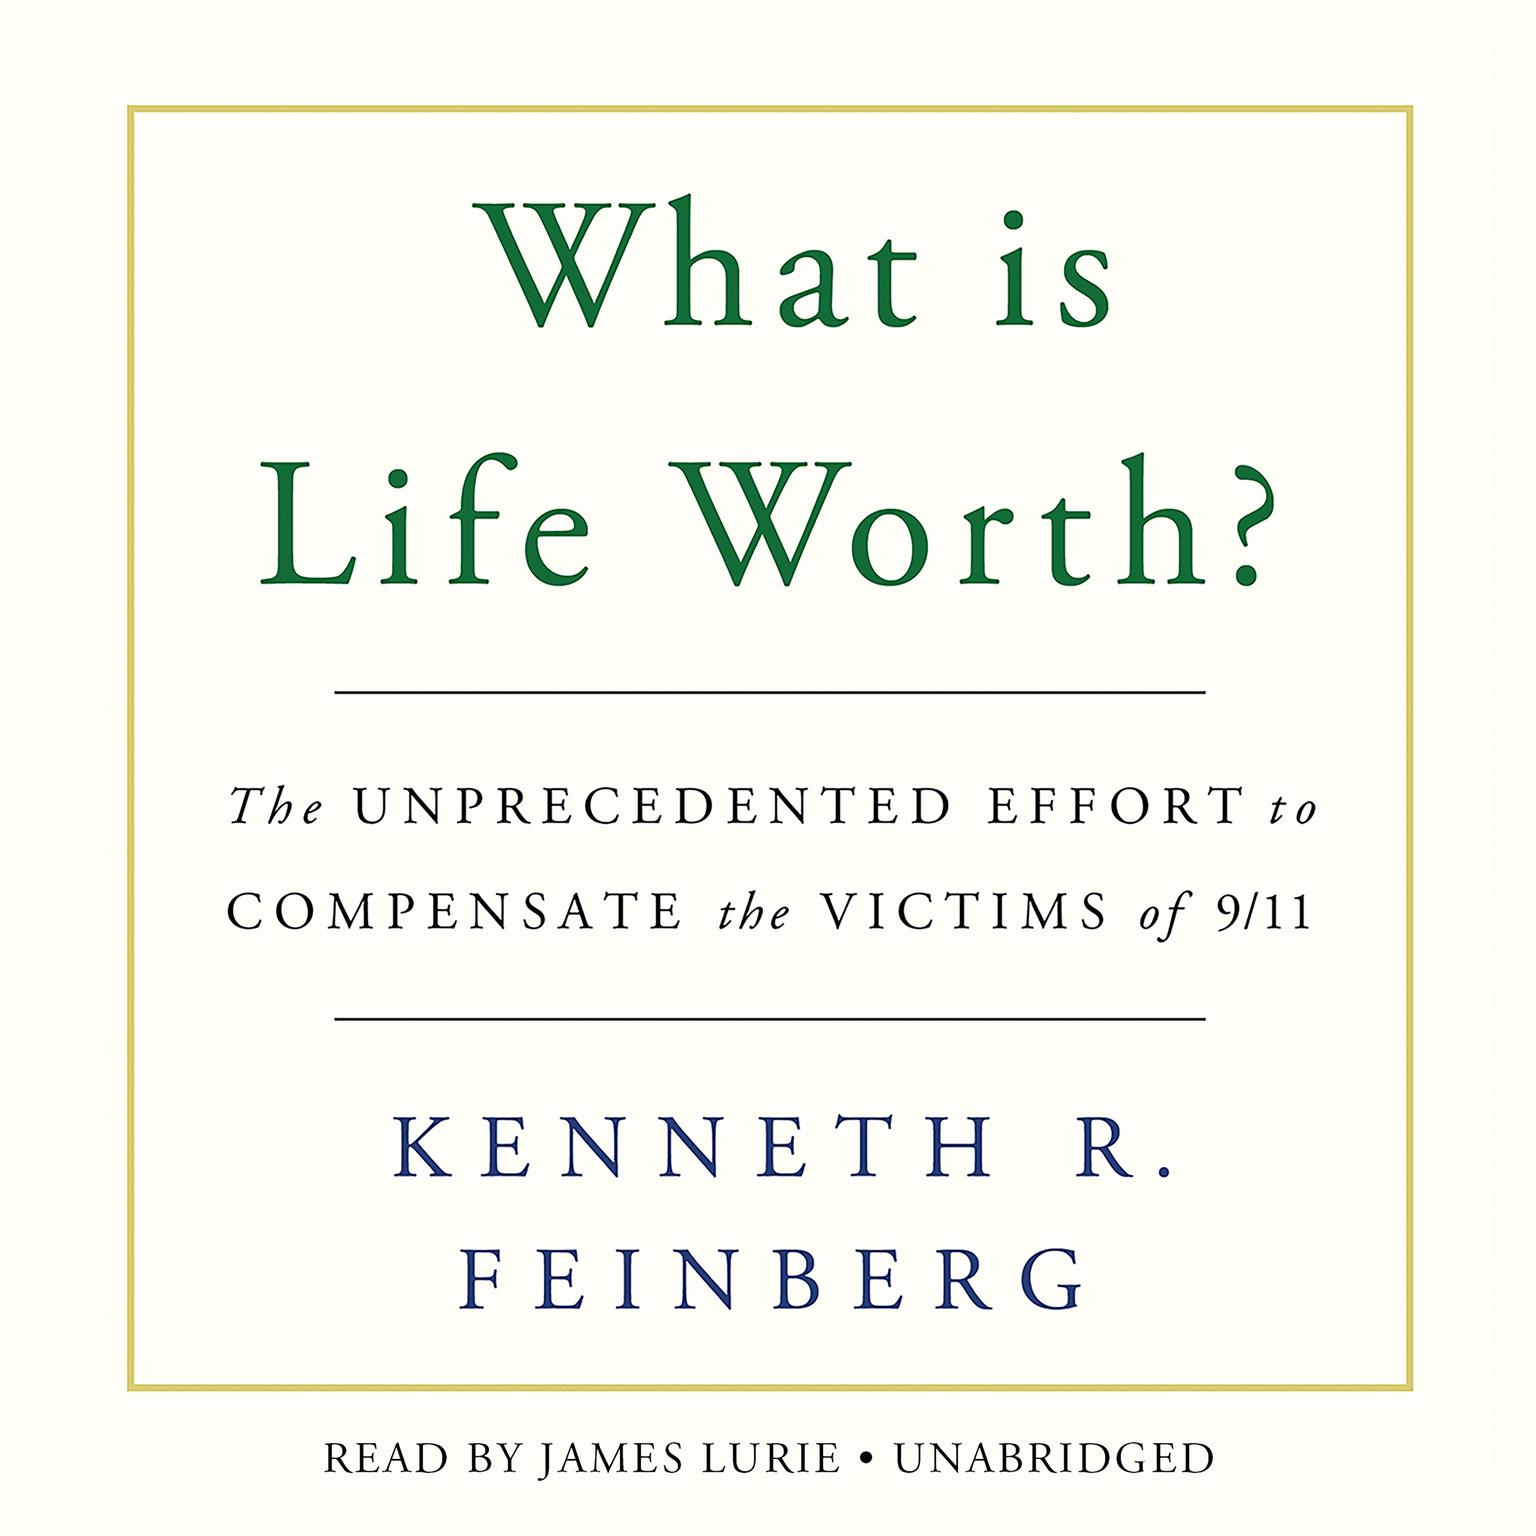 What Is Life Worth?: The Unprecedented Effort to Compensate the Victims of 9/11 Audiobook, by Kenneth R. Feinberg